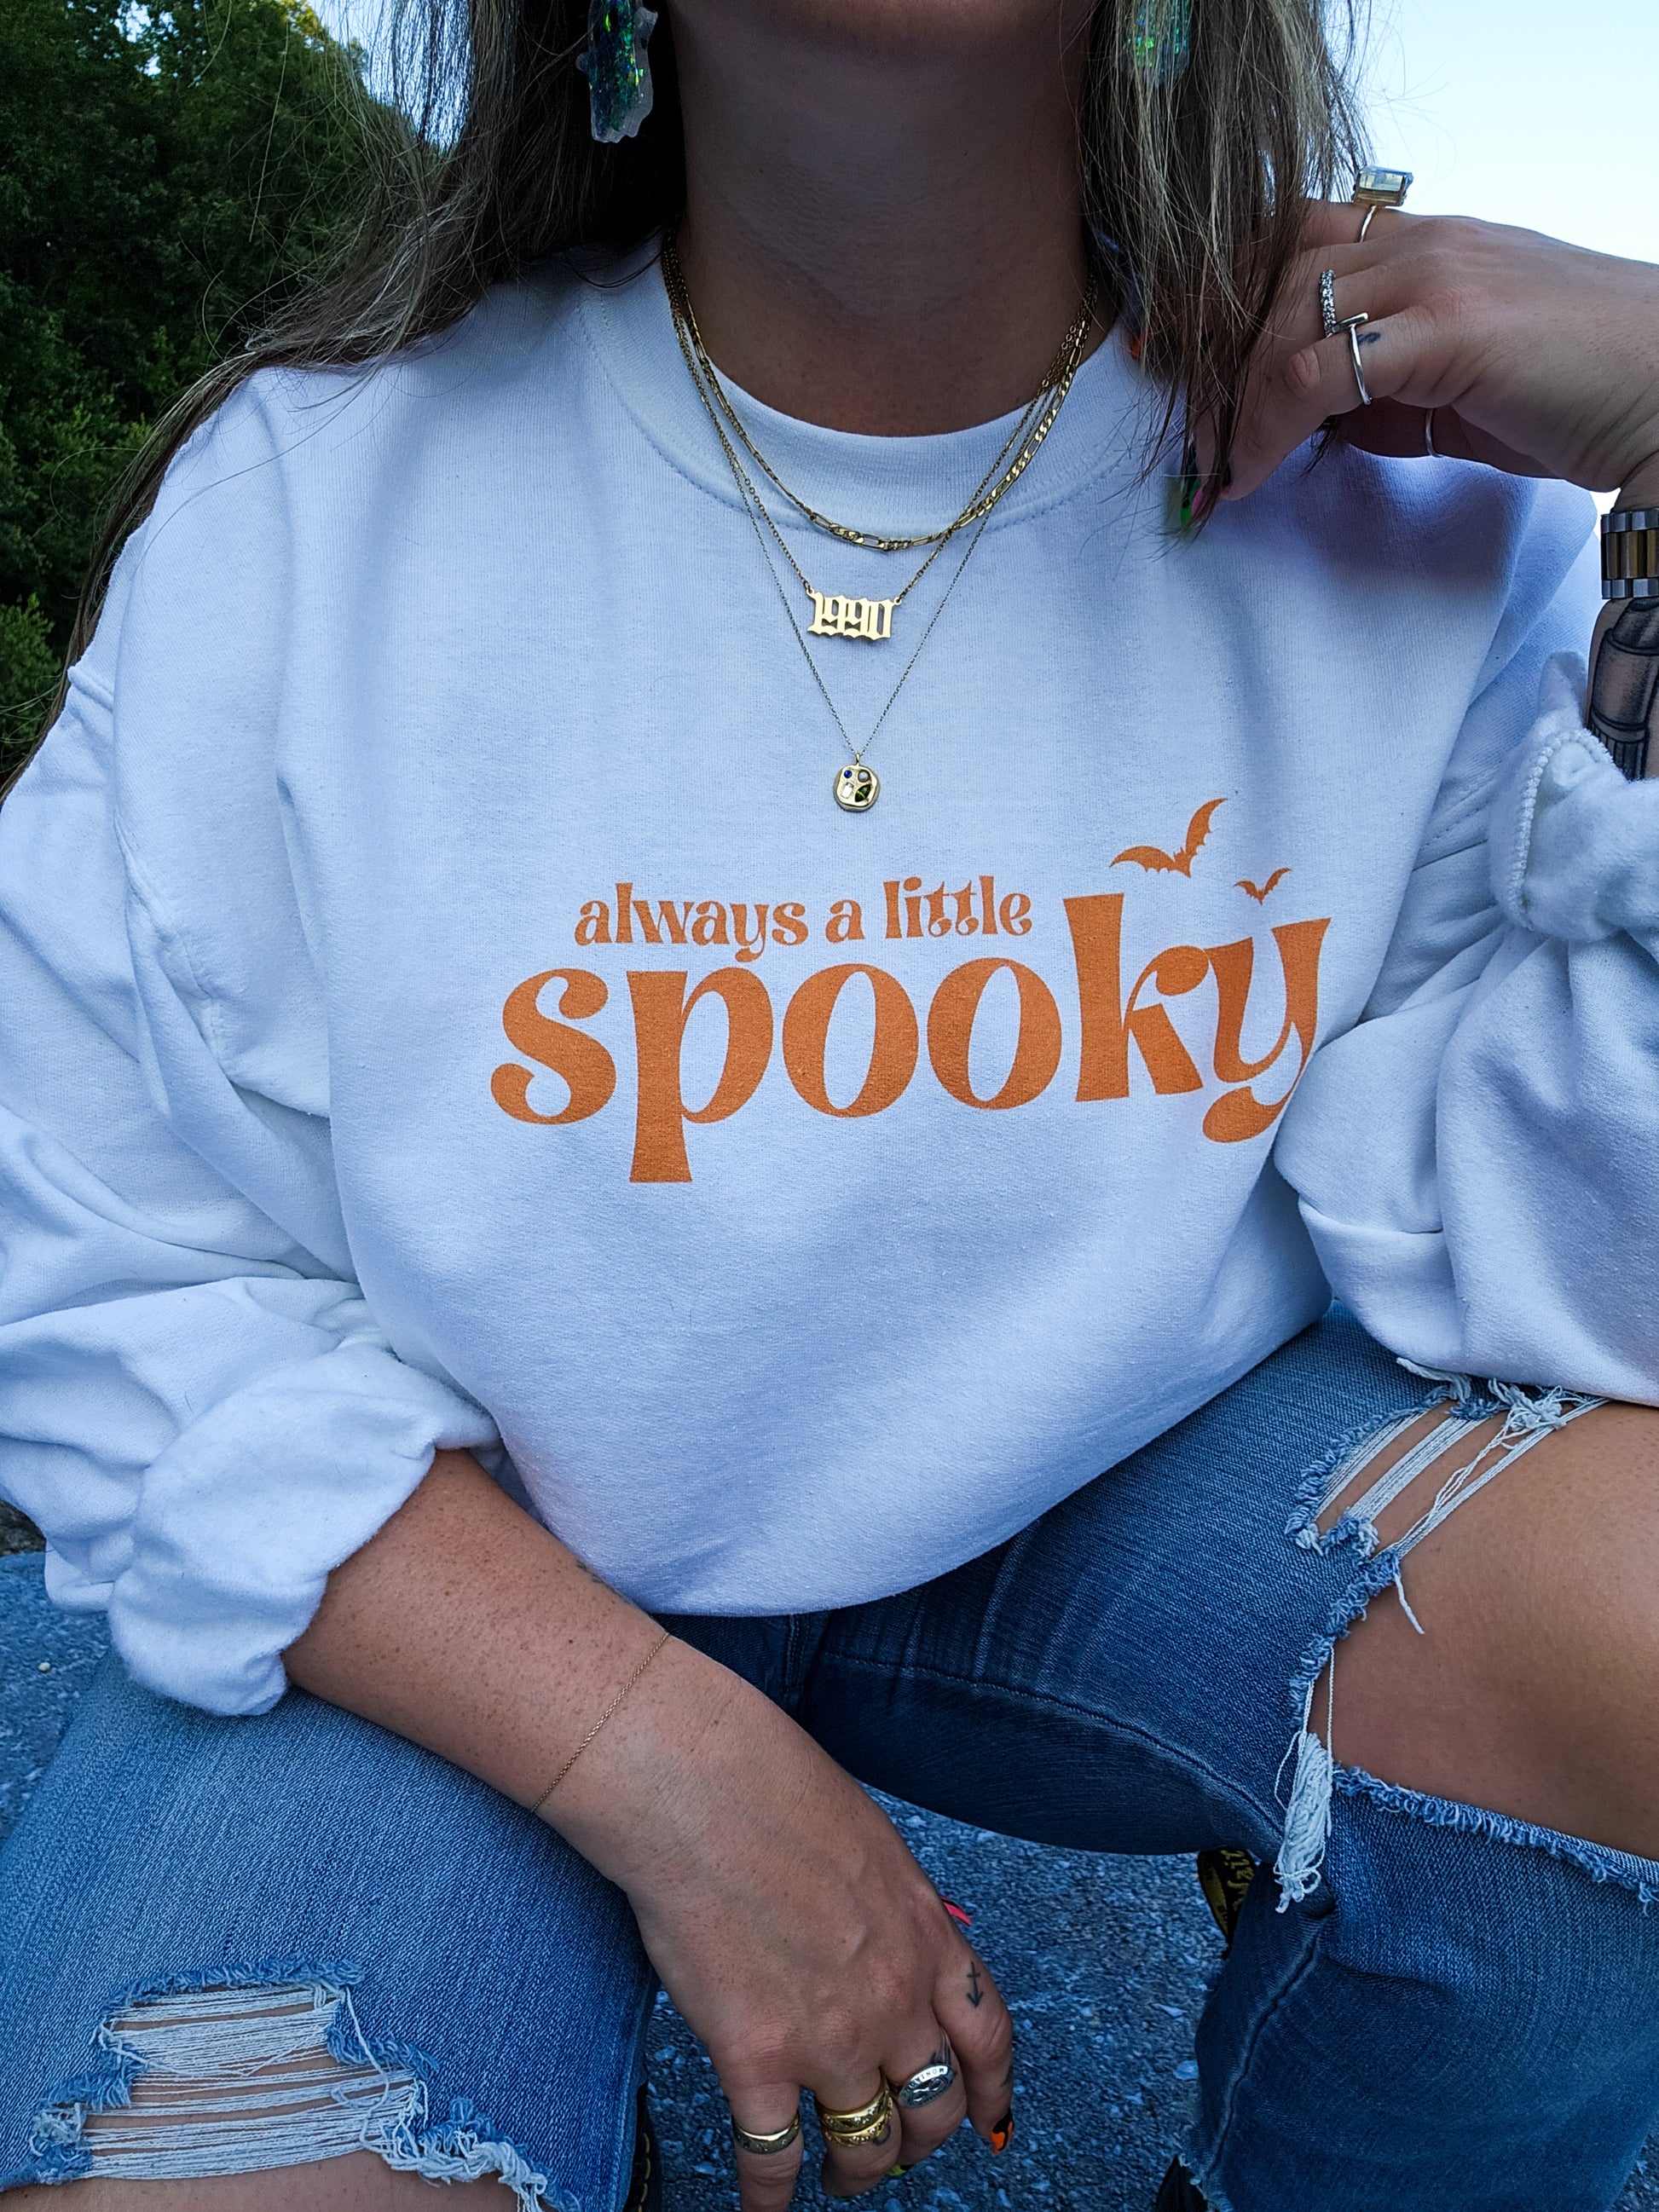 A girl wearing a white Halloween crewneck sweatshirt featuring the phrase "always a little spooky" in a trendy orange font